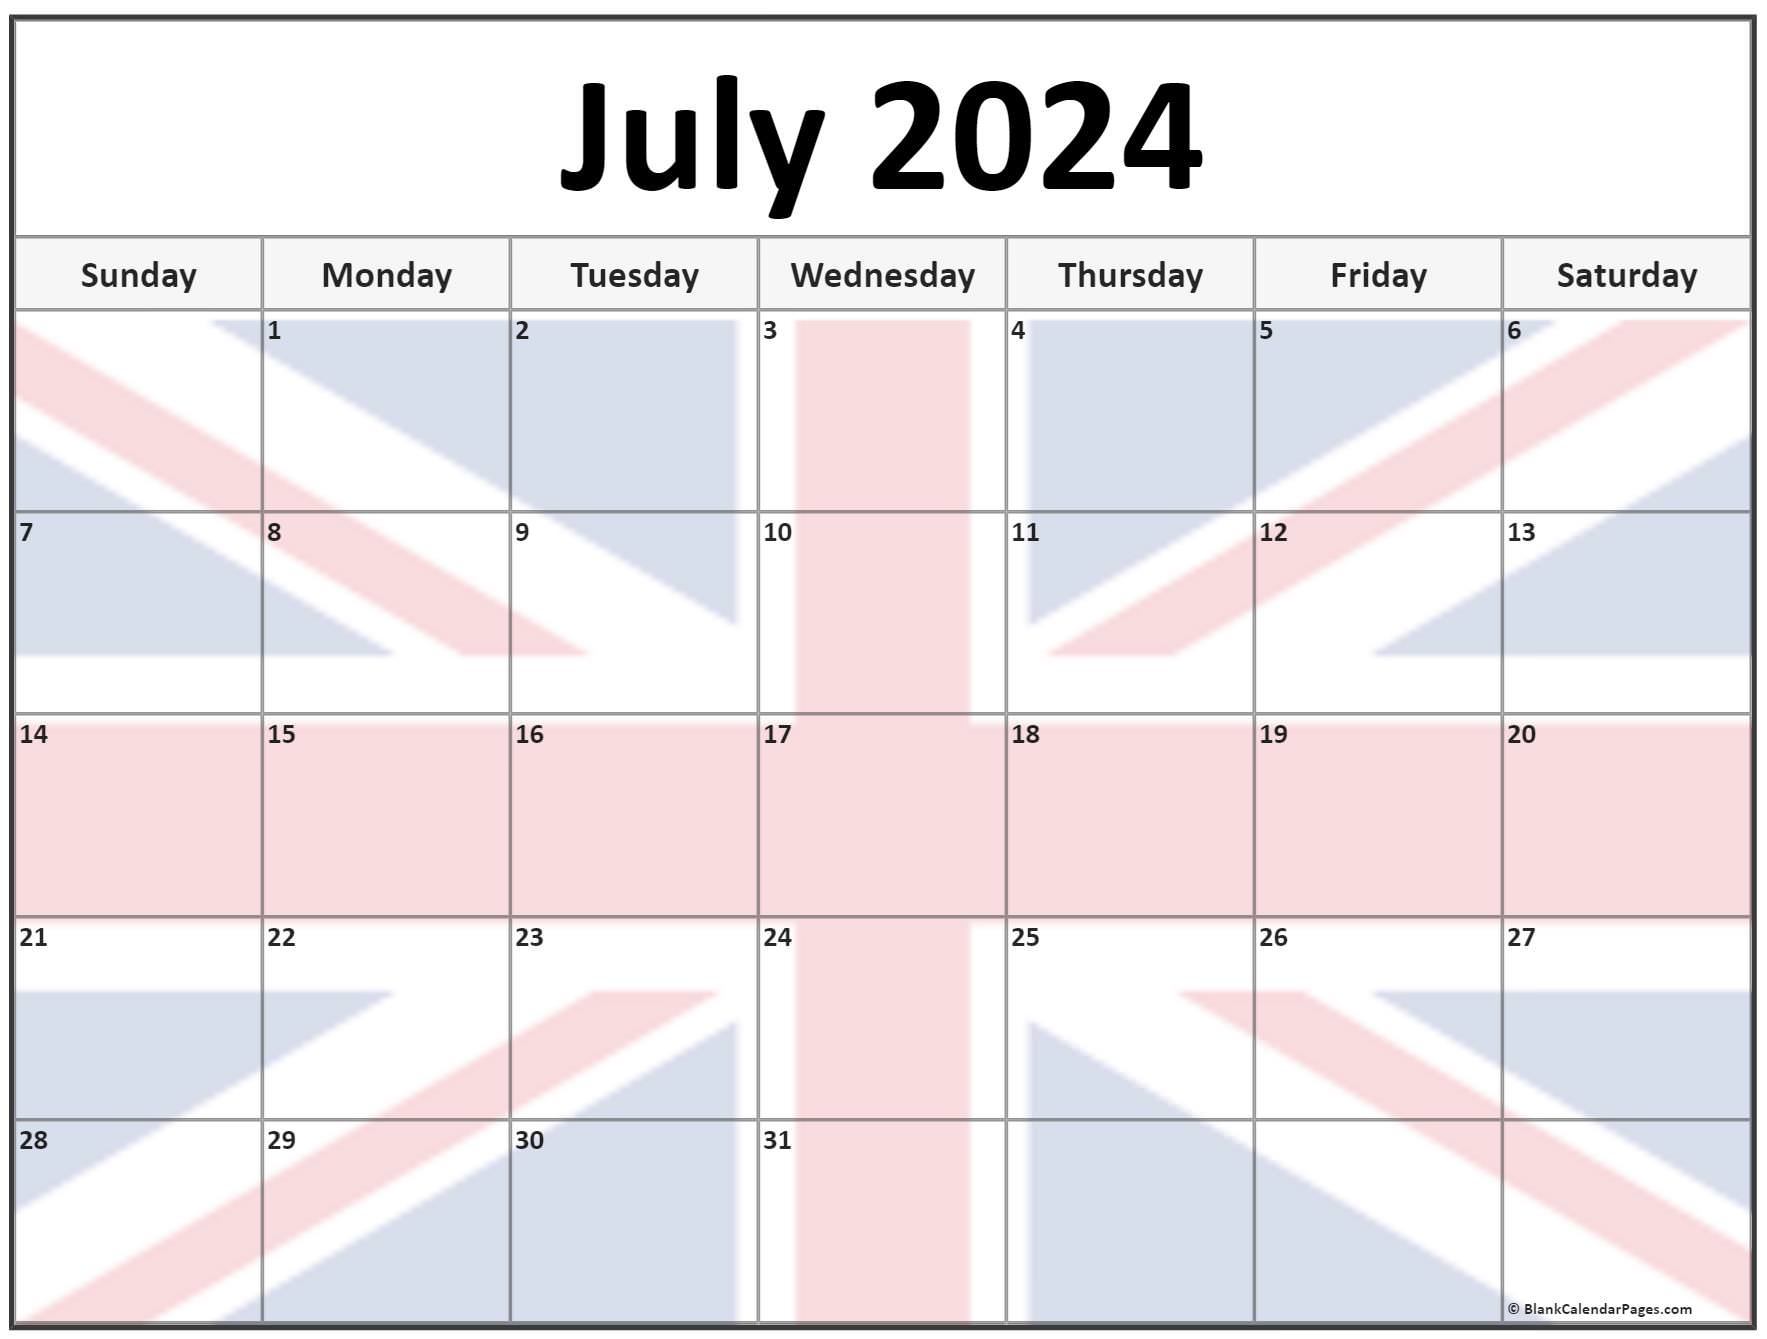 Collection of July 2022 photo calendars with image filters.